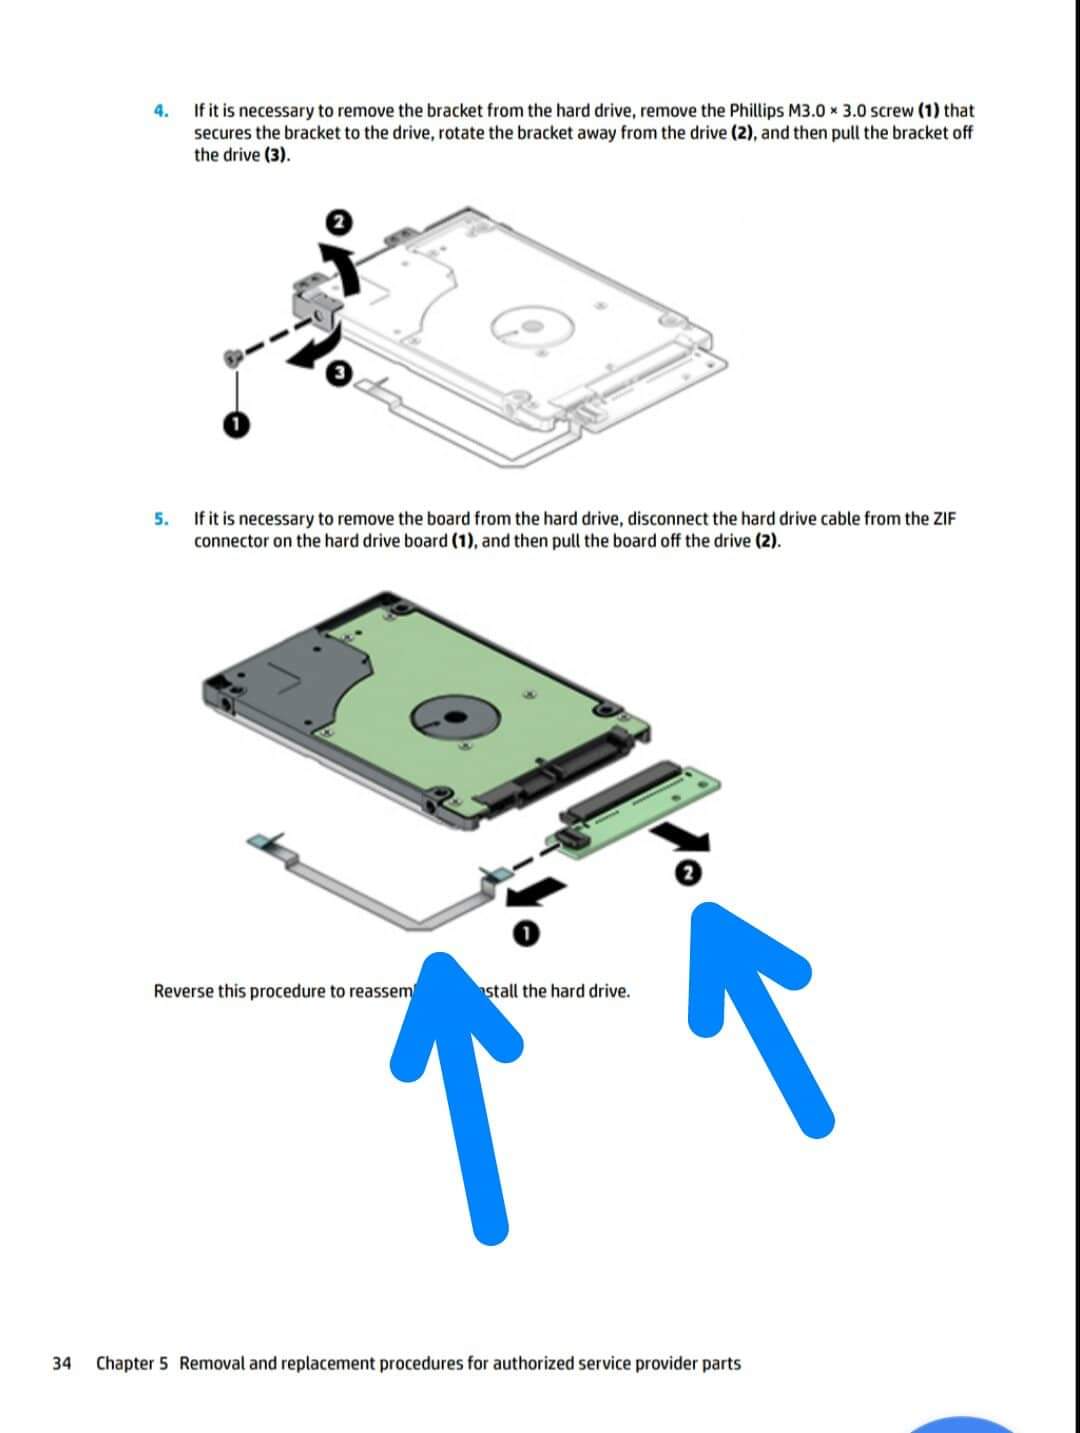 Solved: Dont have hard drive sata connector - HP Support Community - 7179600